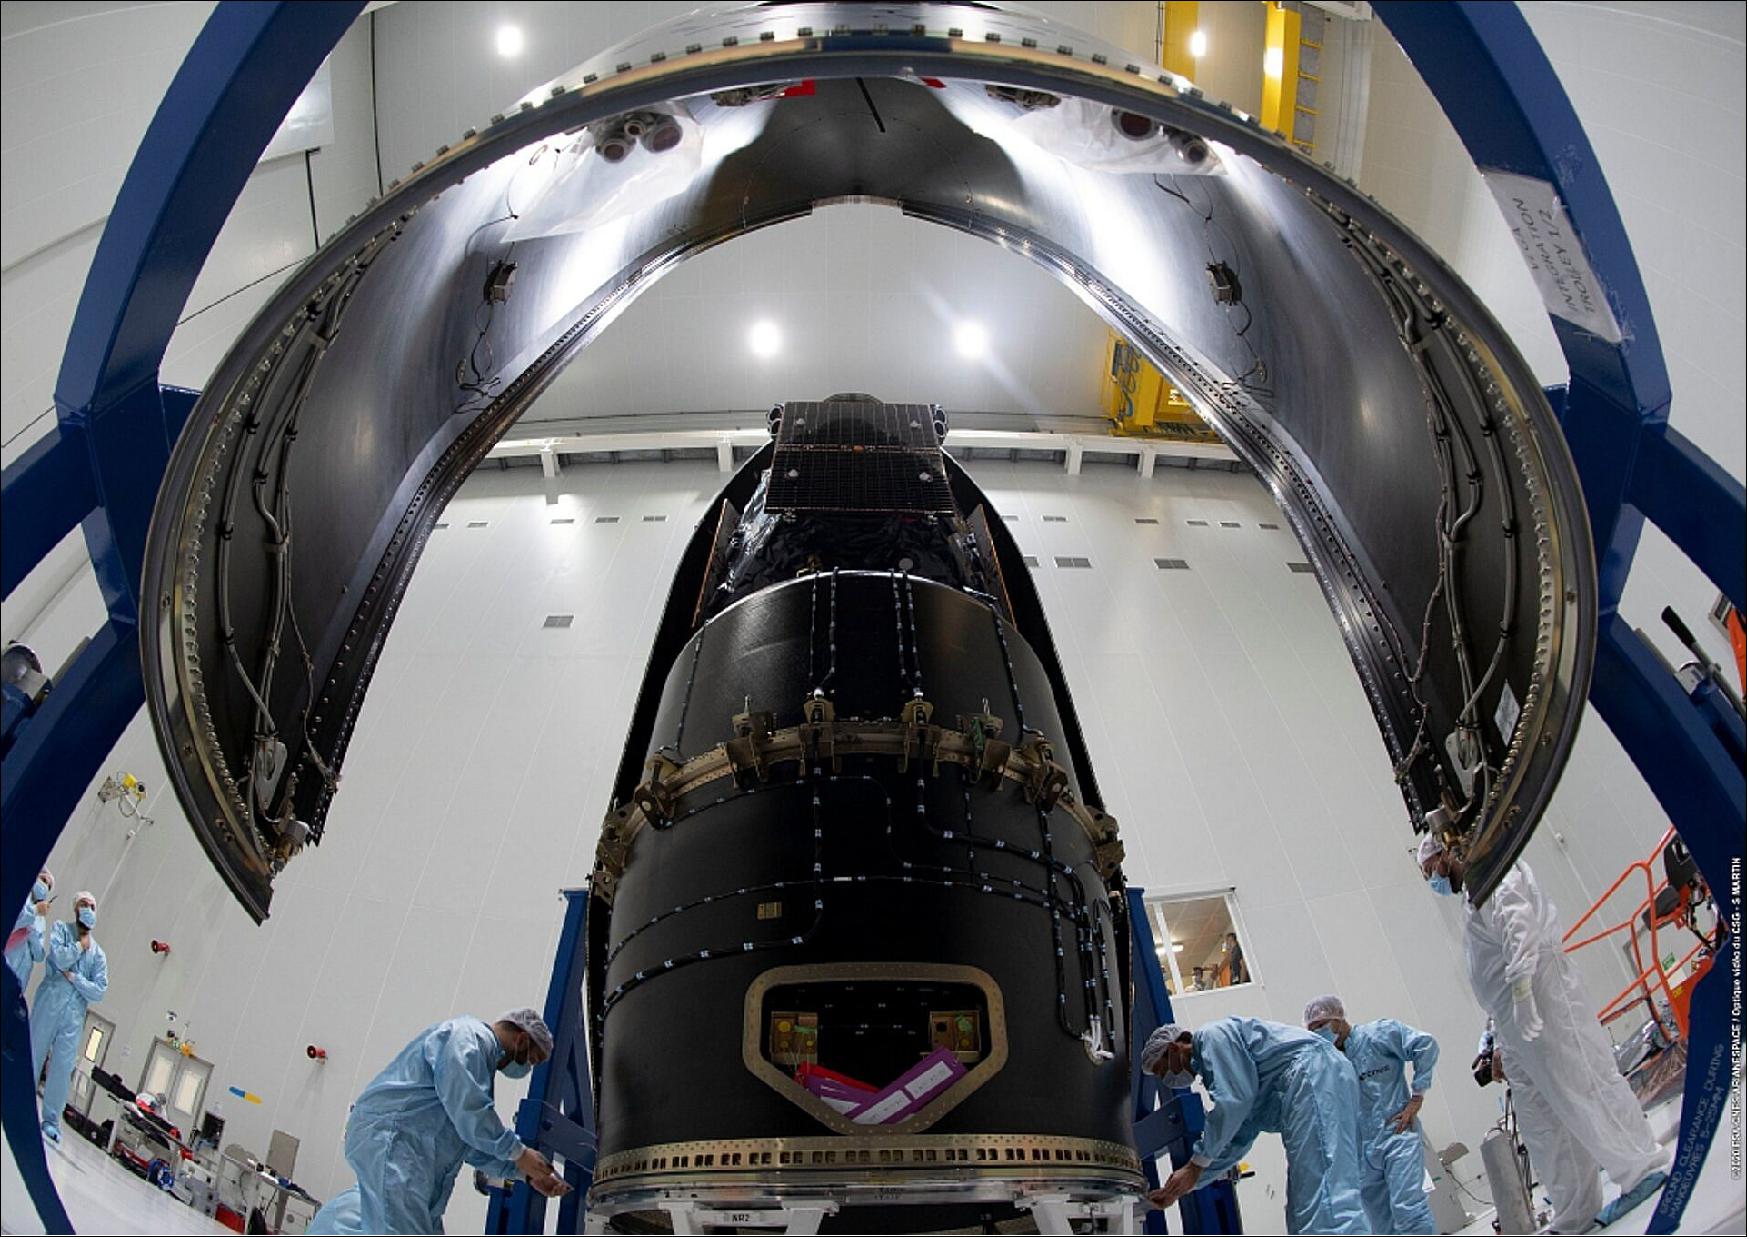 Figure 8: The fairing is being closed on the Spanish high-resolution land imaging satellite, known as SEOSAT-Ingenio, in the S5 Payload Processing Facility of Europe's Spaceport in Kourou, French Guiana on 5 November 2020 (image credit: ESA/CNES/Arianespace/Optique Video du CSG - S. Martin)